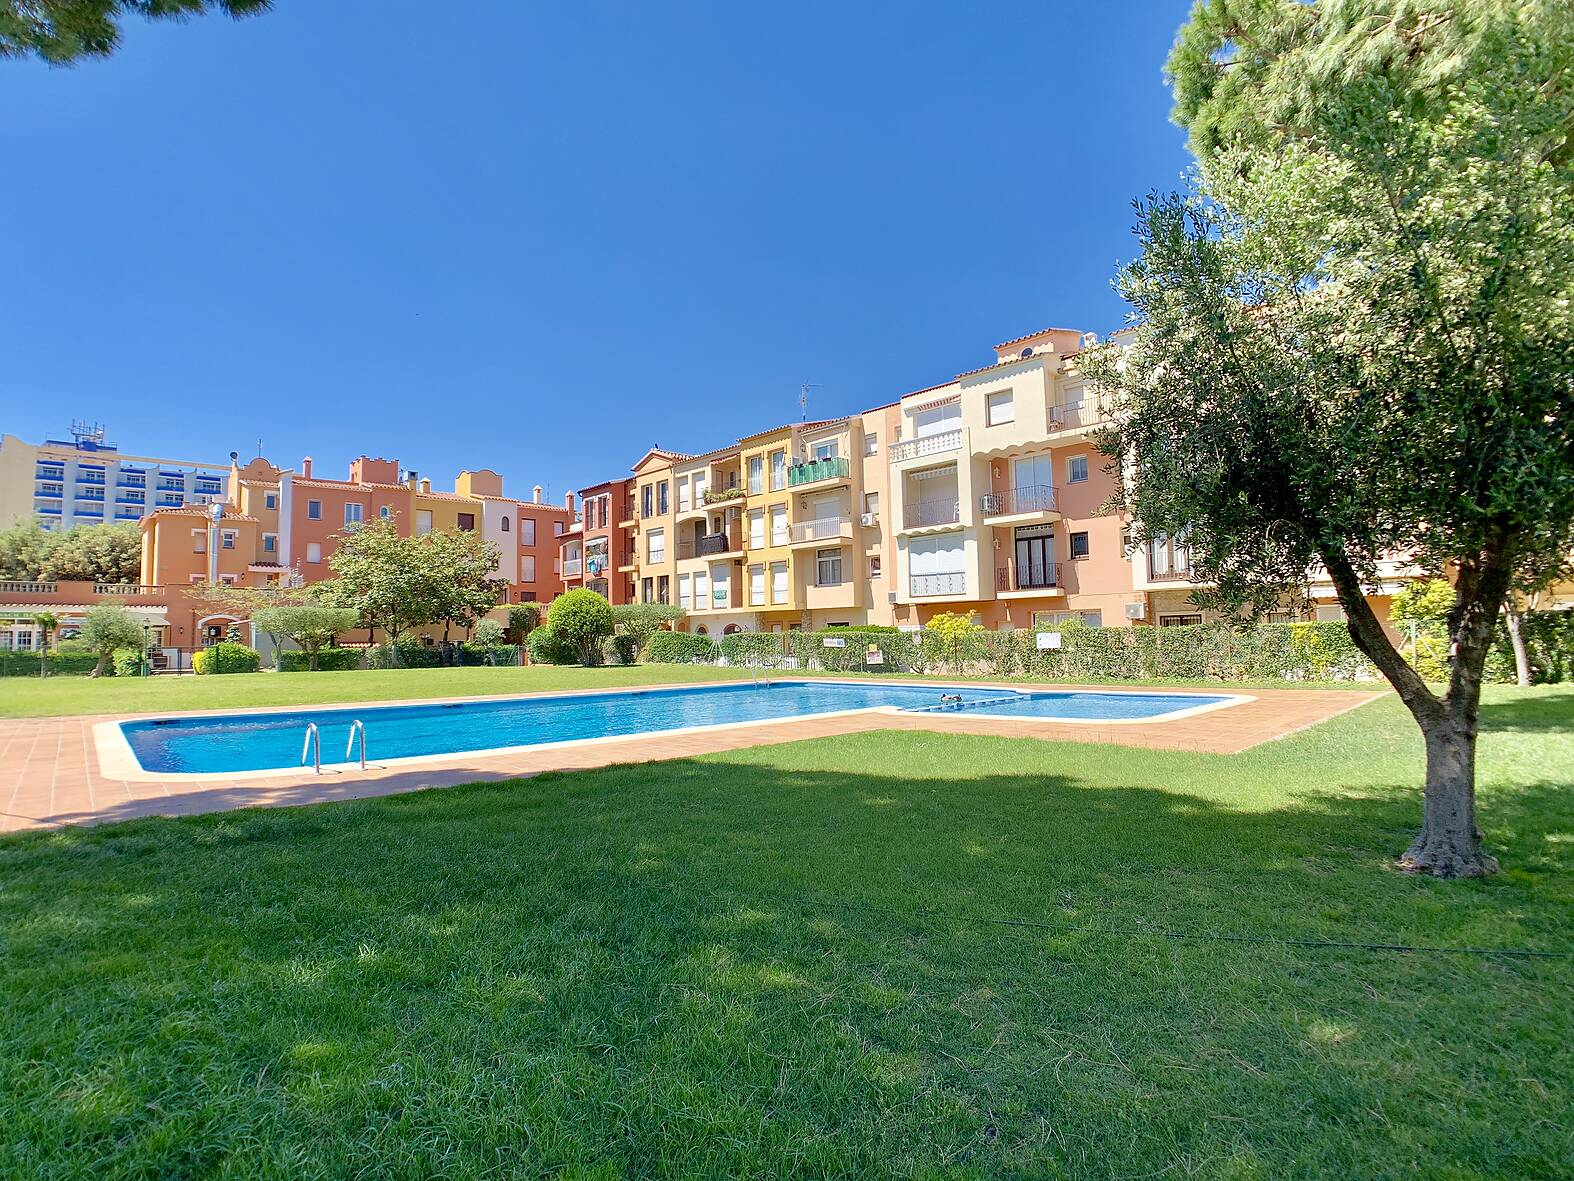 Beautiful apartment with swimming pool for sale in Empuriabrava